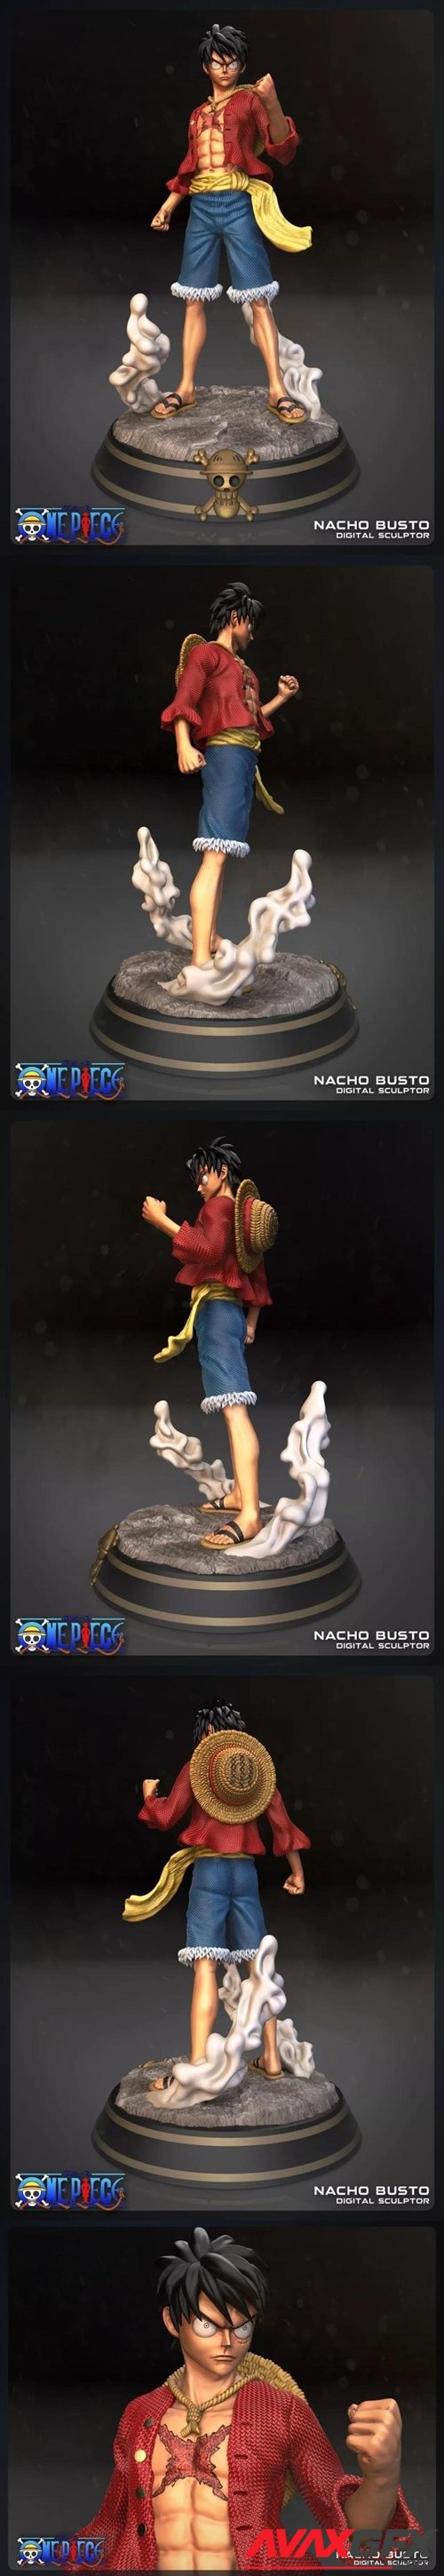 Luffy - One Piece – 3D Printable STL